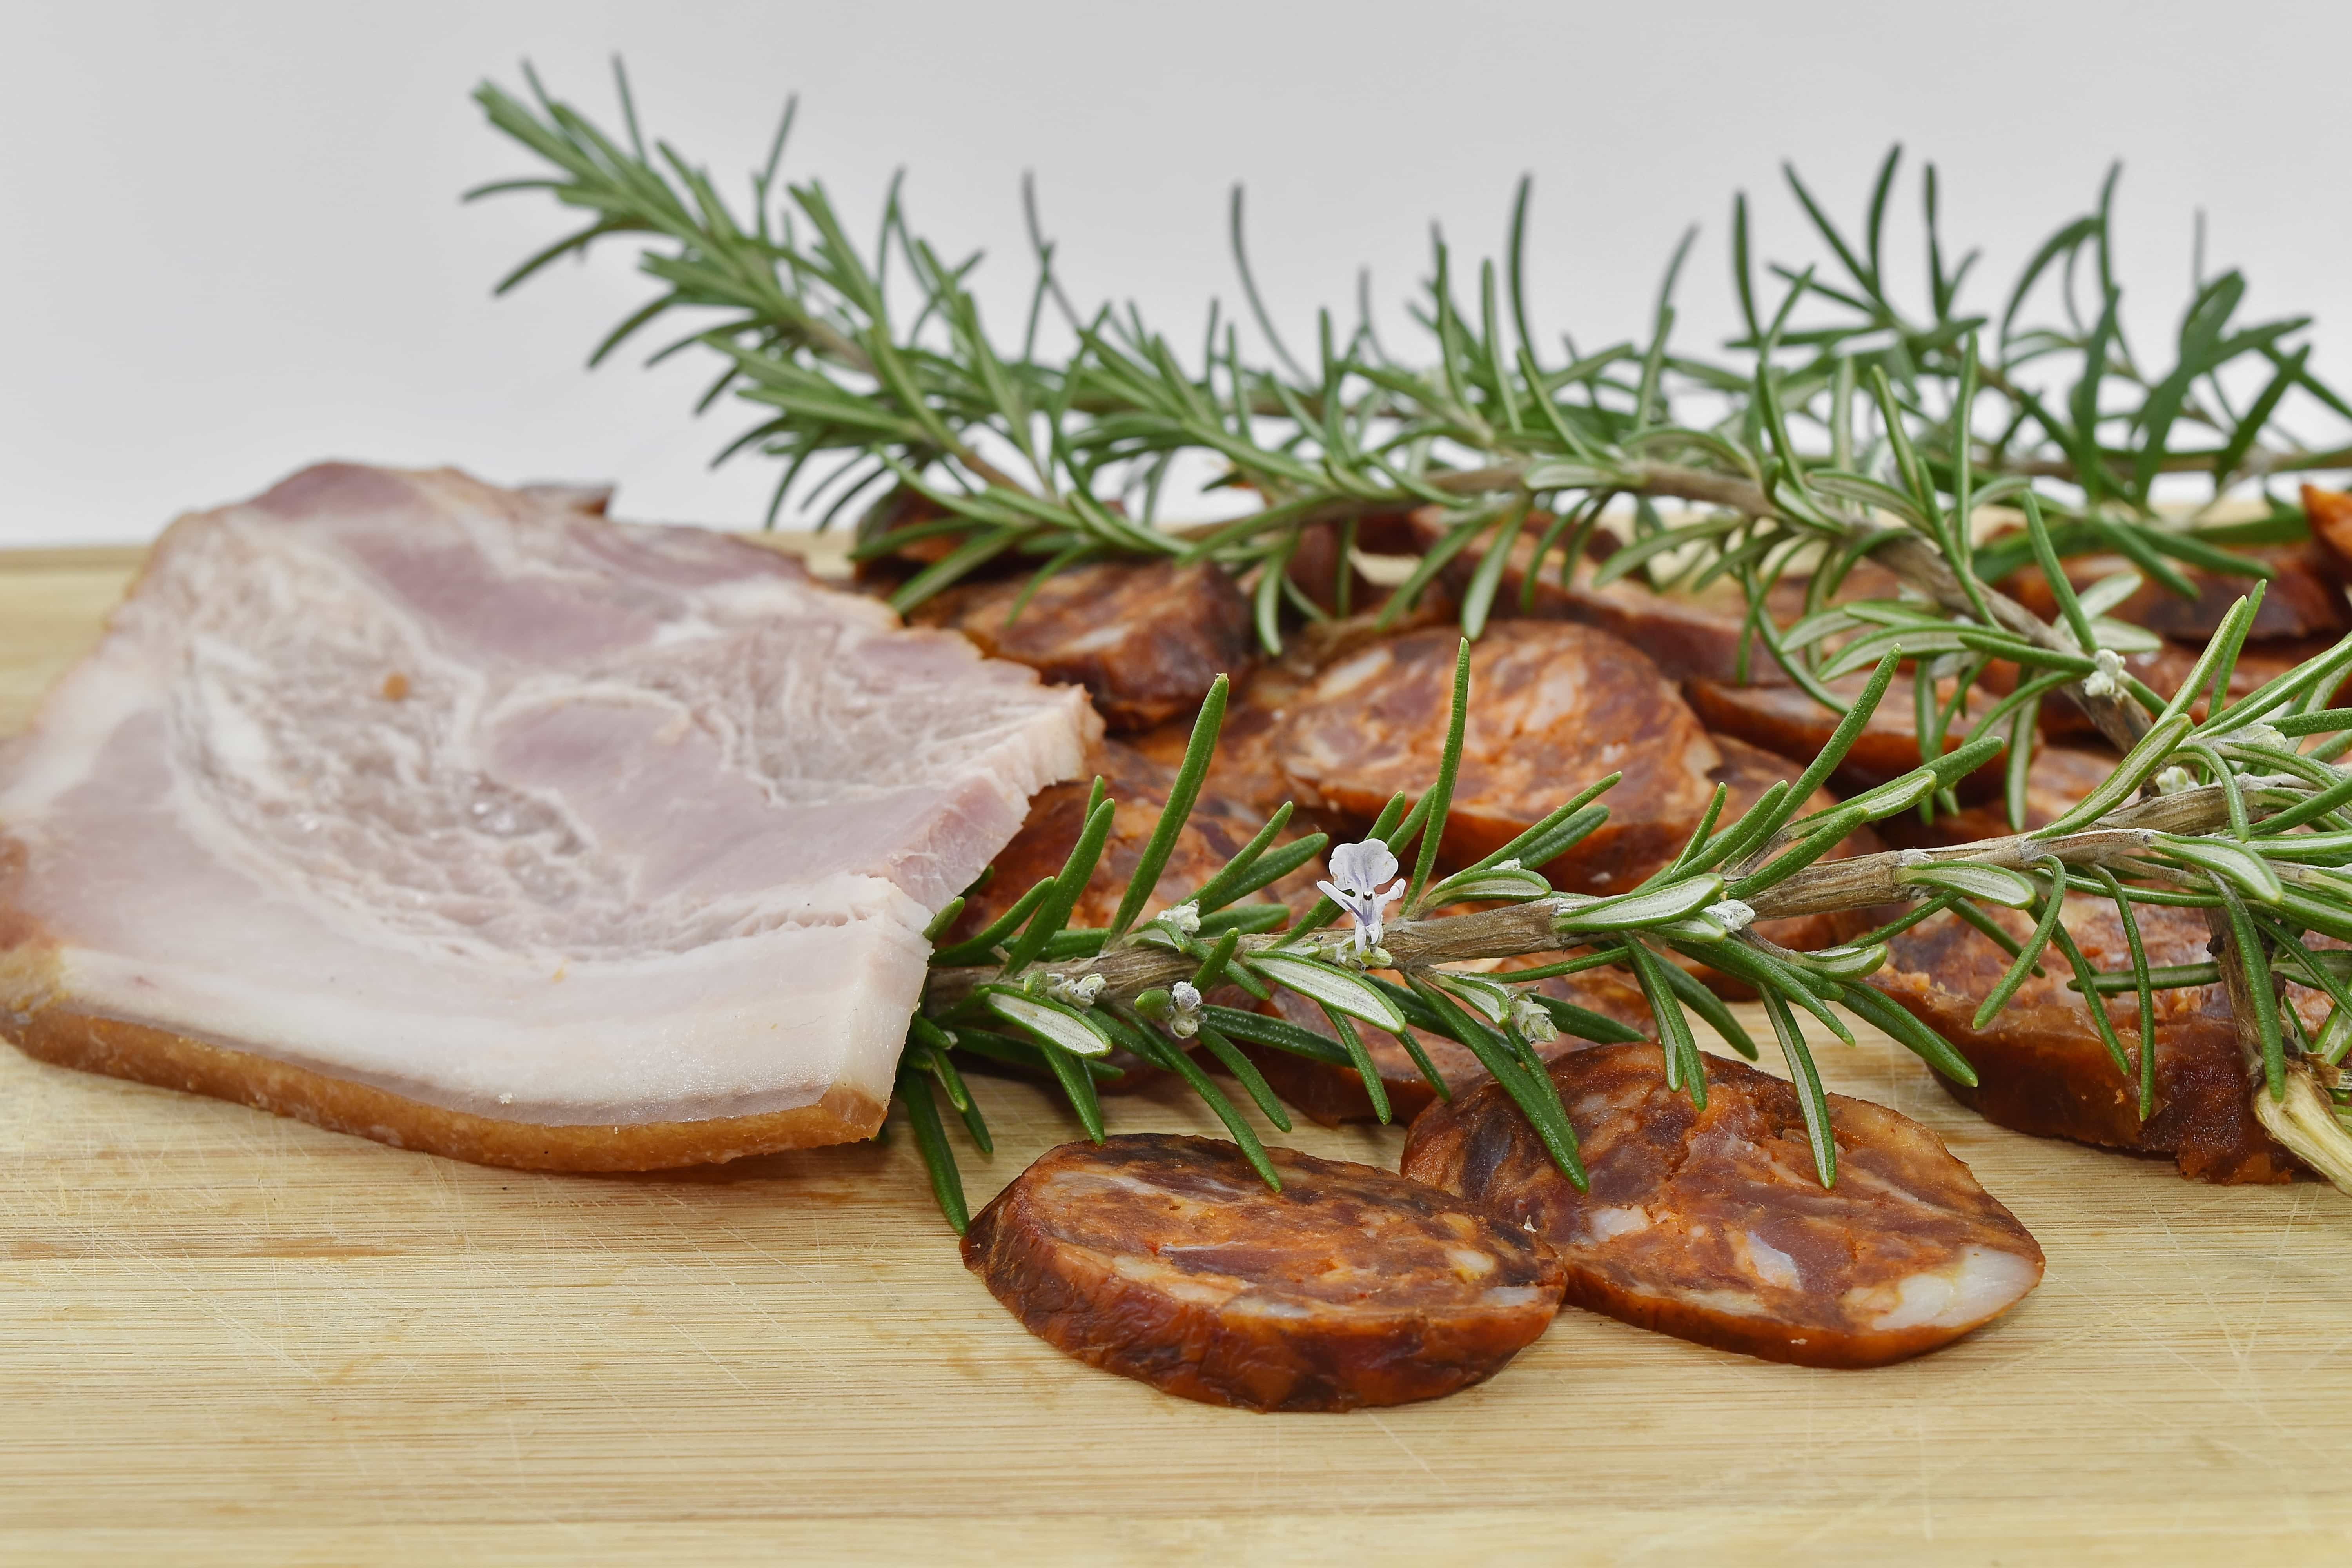 Free picture: pork, pork loin, rosemary, slices, snack, tasty, food, meat, lunch, meal